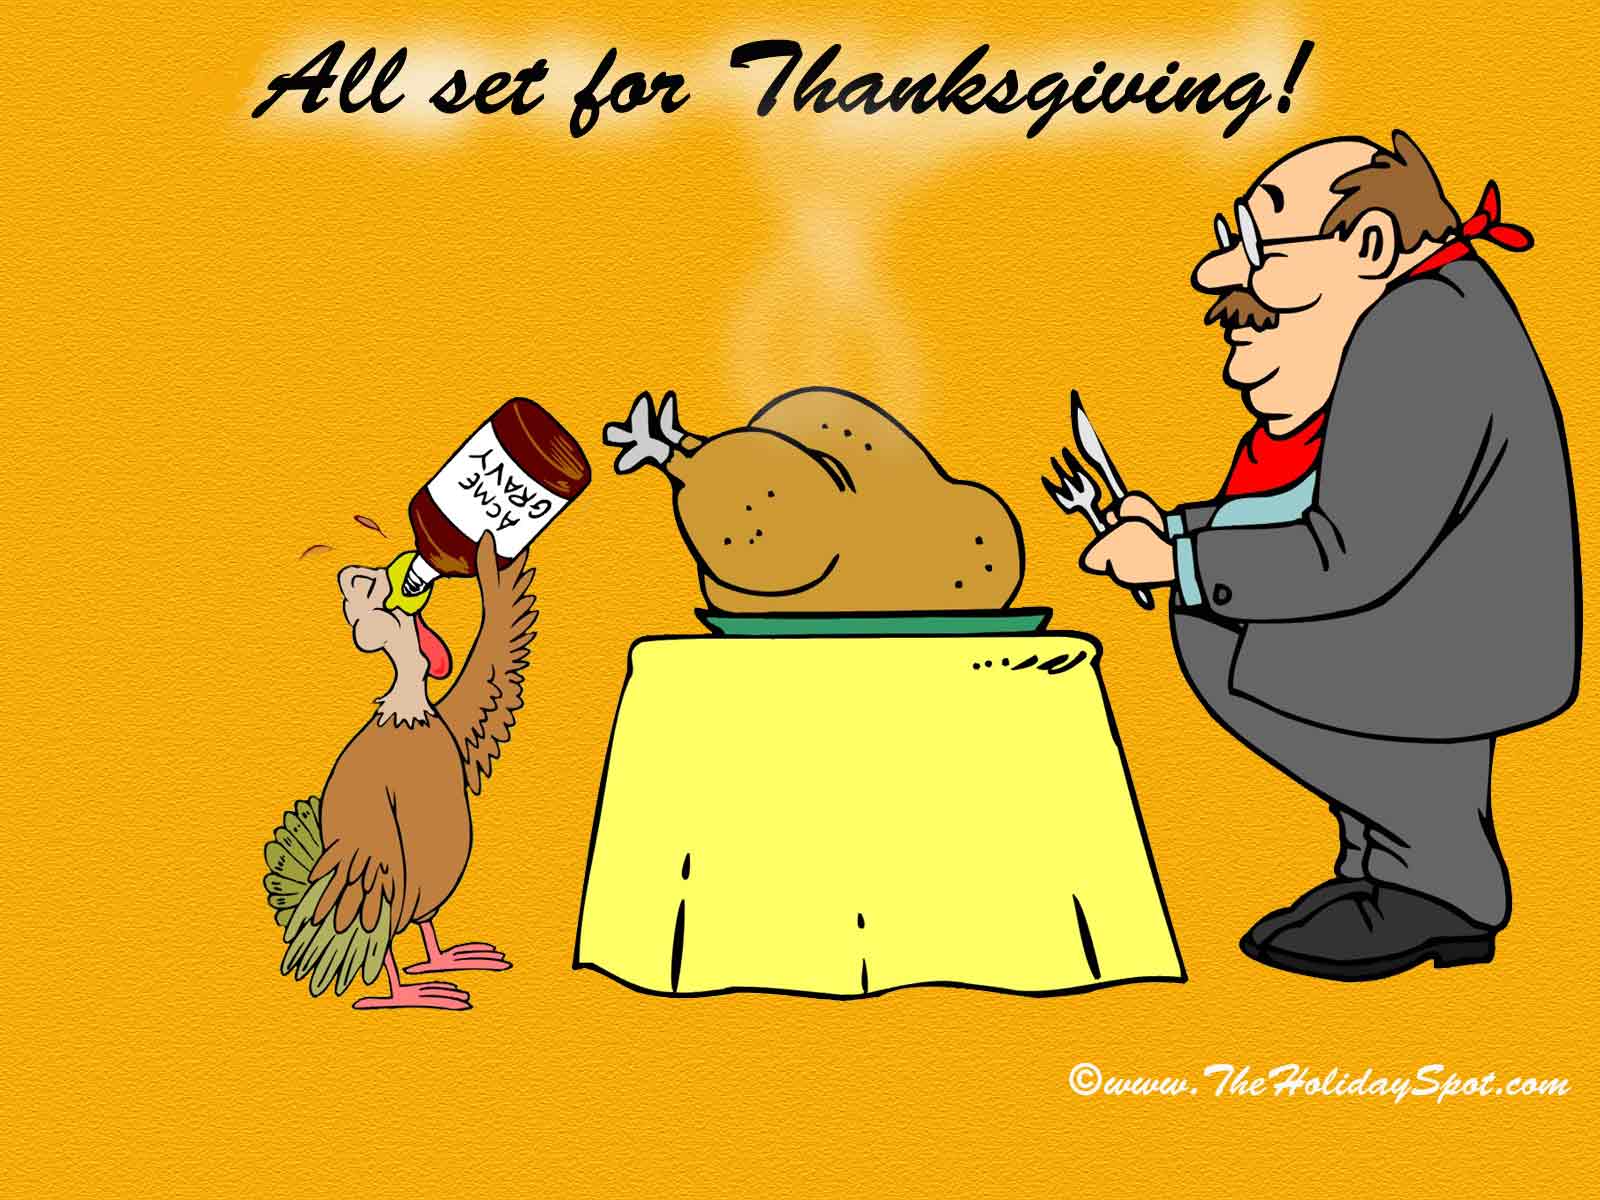 Thanksgiving Quotes Funny. Free Internet Picture